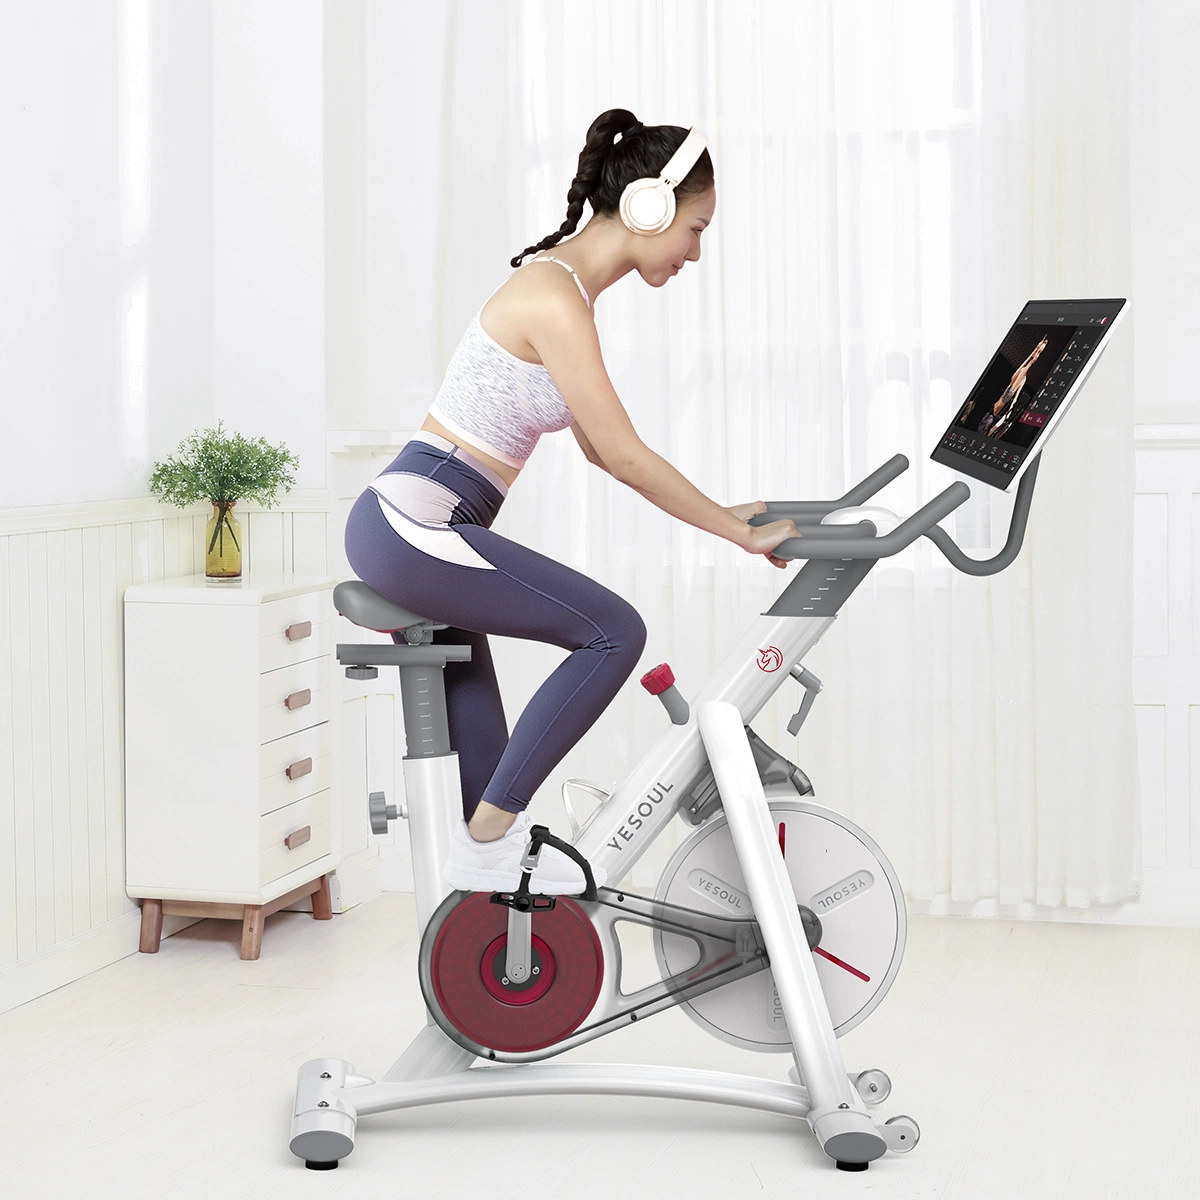 Yesoul Quiet Indoor Exercise Gym Equipment Magnetic Spinning Bike